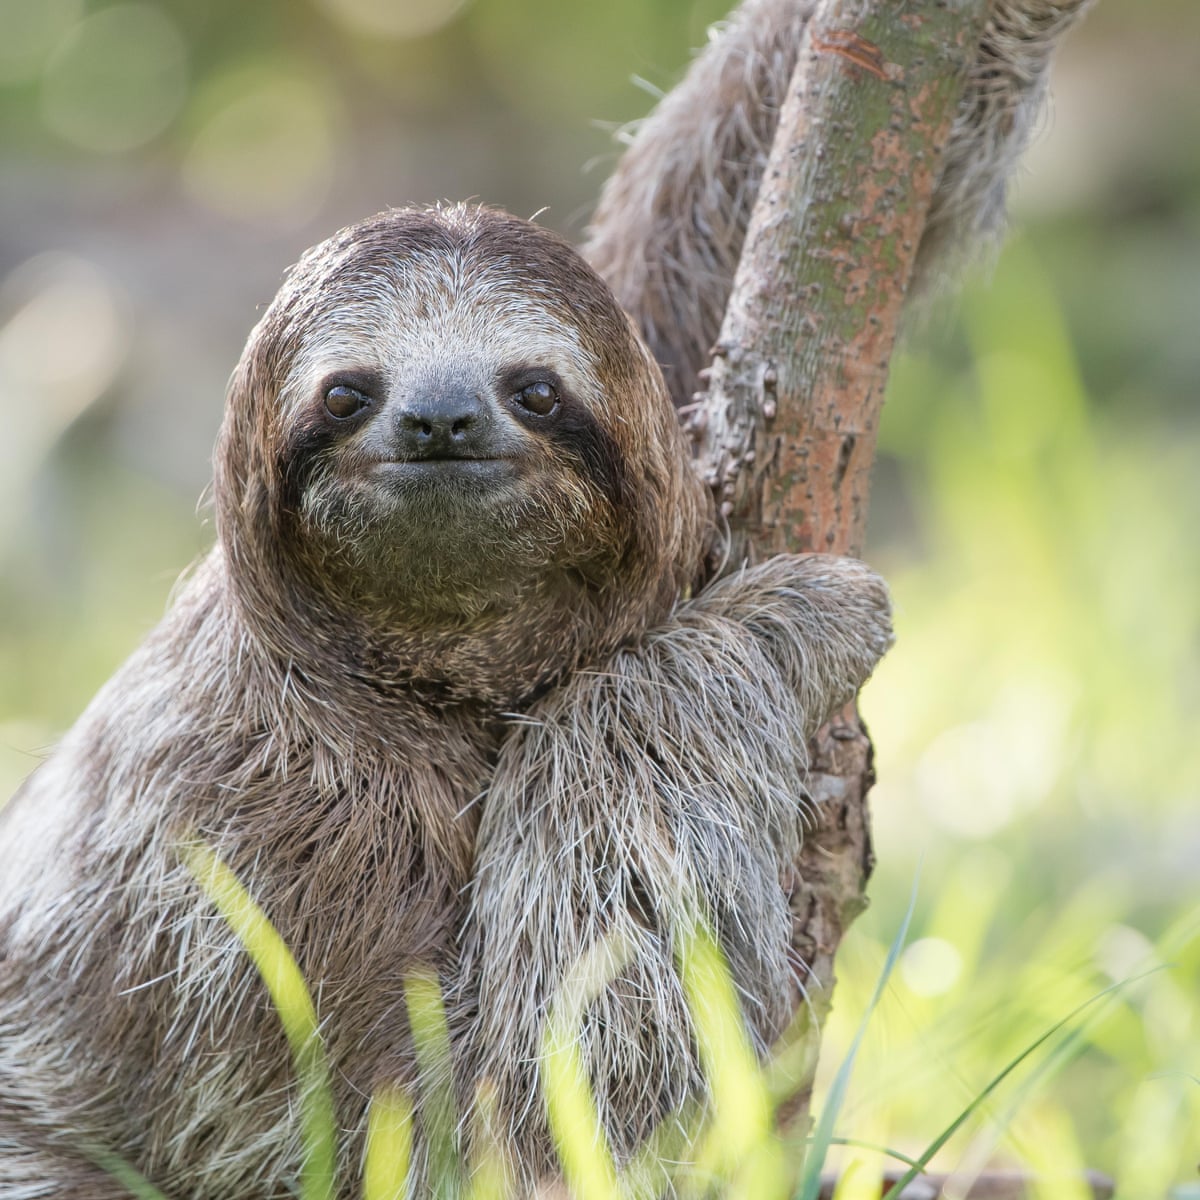 Why can't we leave them alone? The troubling truth about selfies with sloths  | Animals | The Guardian